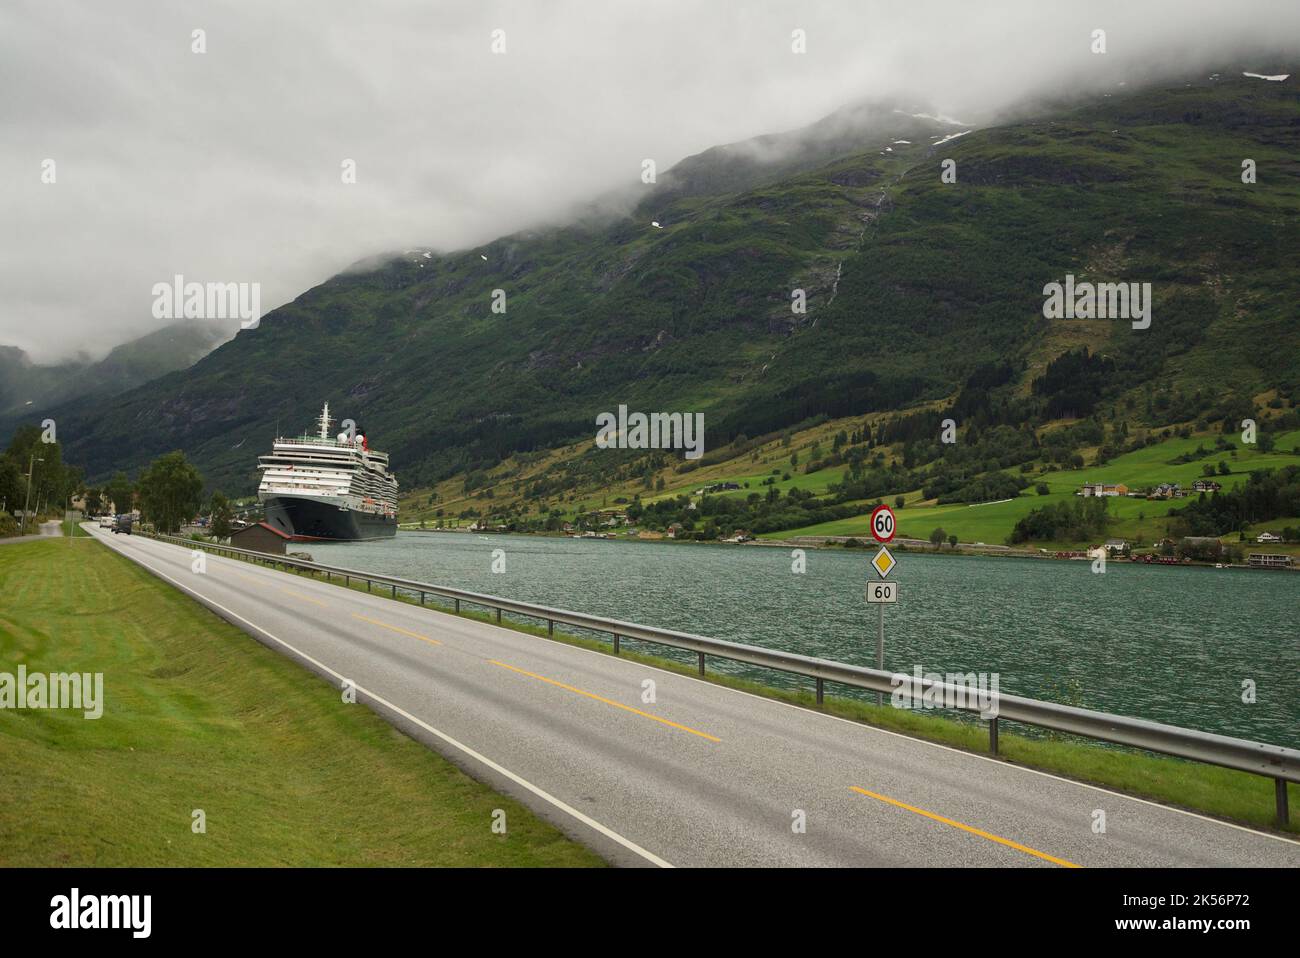 Queen Victoria cruise ship, a Cunard cruise docked in the dock of Olden, Stryn, Vestland county, Norway. Cunard Queen Victoria, Norwegian Fjords. Stock Photo